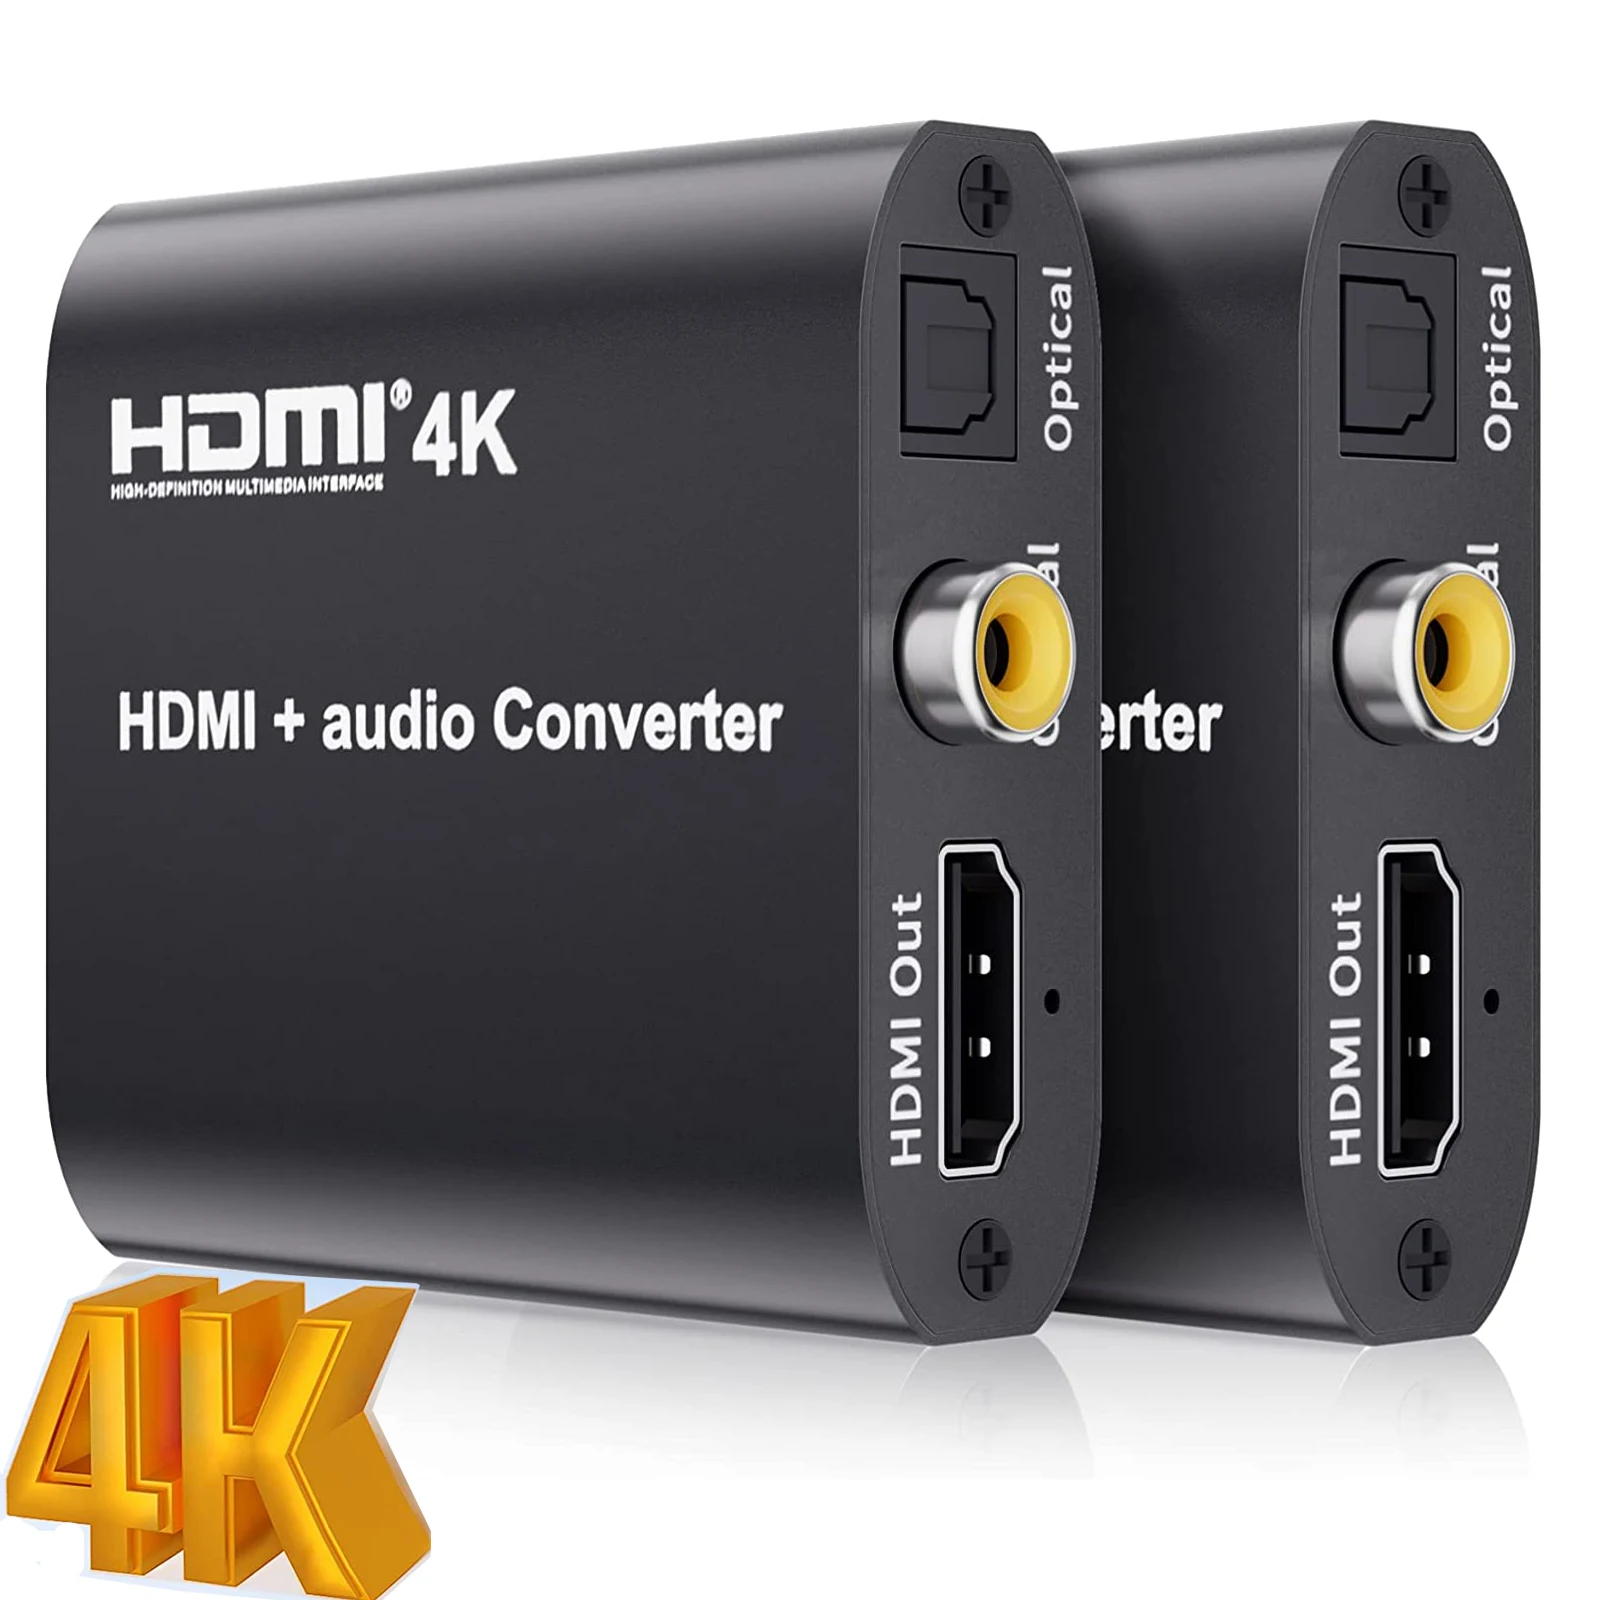 

UHD 4K HDMI audio extractor splitter HDMI to toslink Spdif coaxial audio converter HDMI to HDMI+digital audio for HDTV Monitor